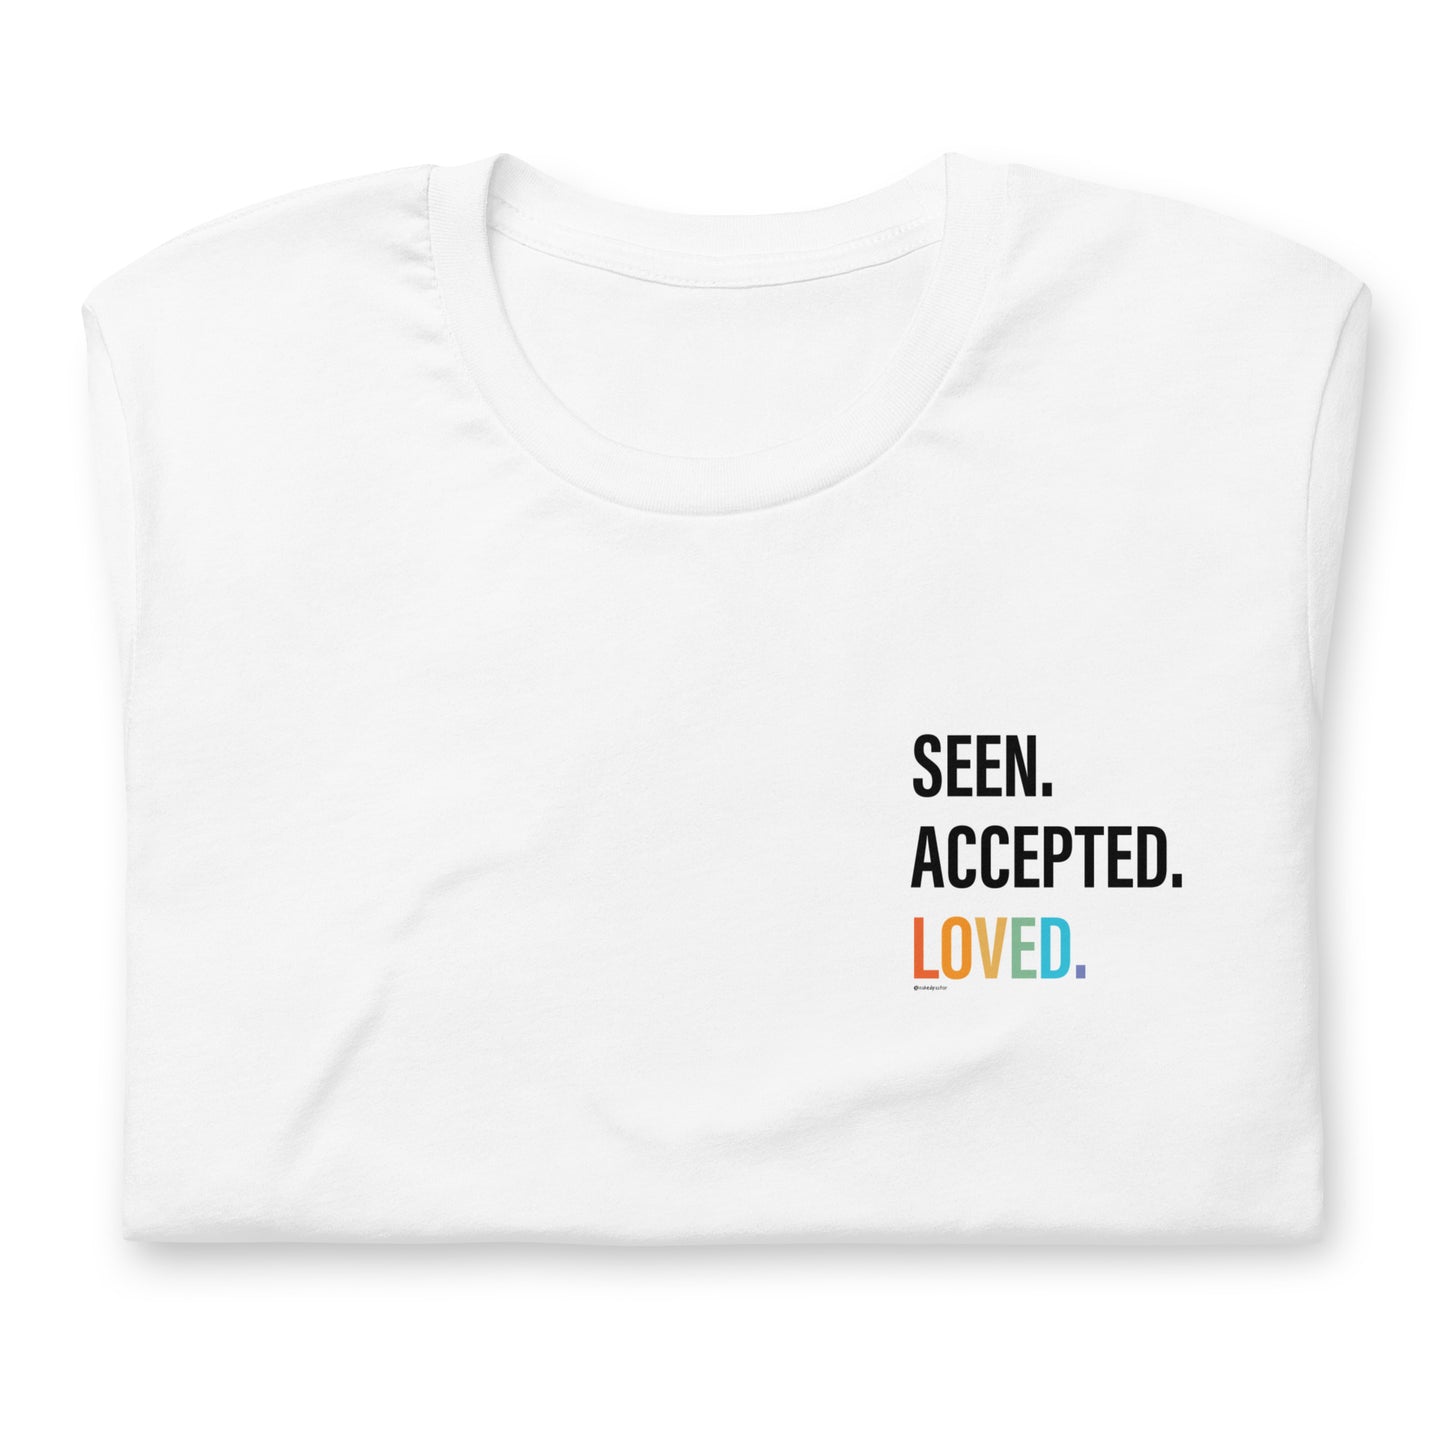 Seen. Accepted. Loved T-Shirt